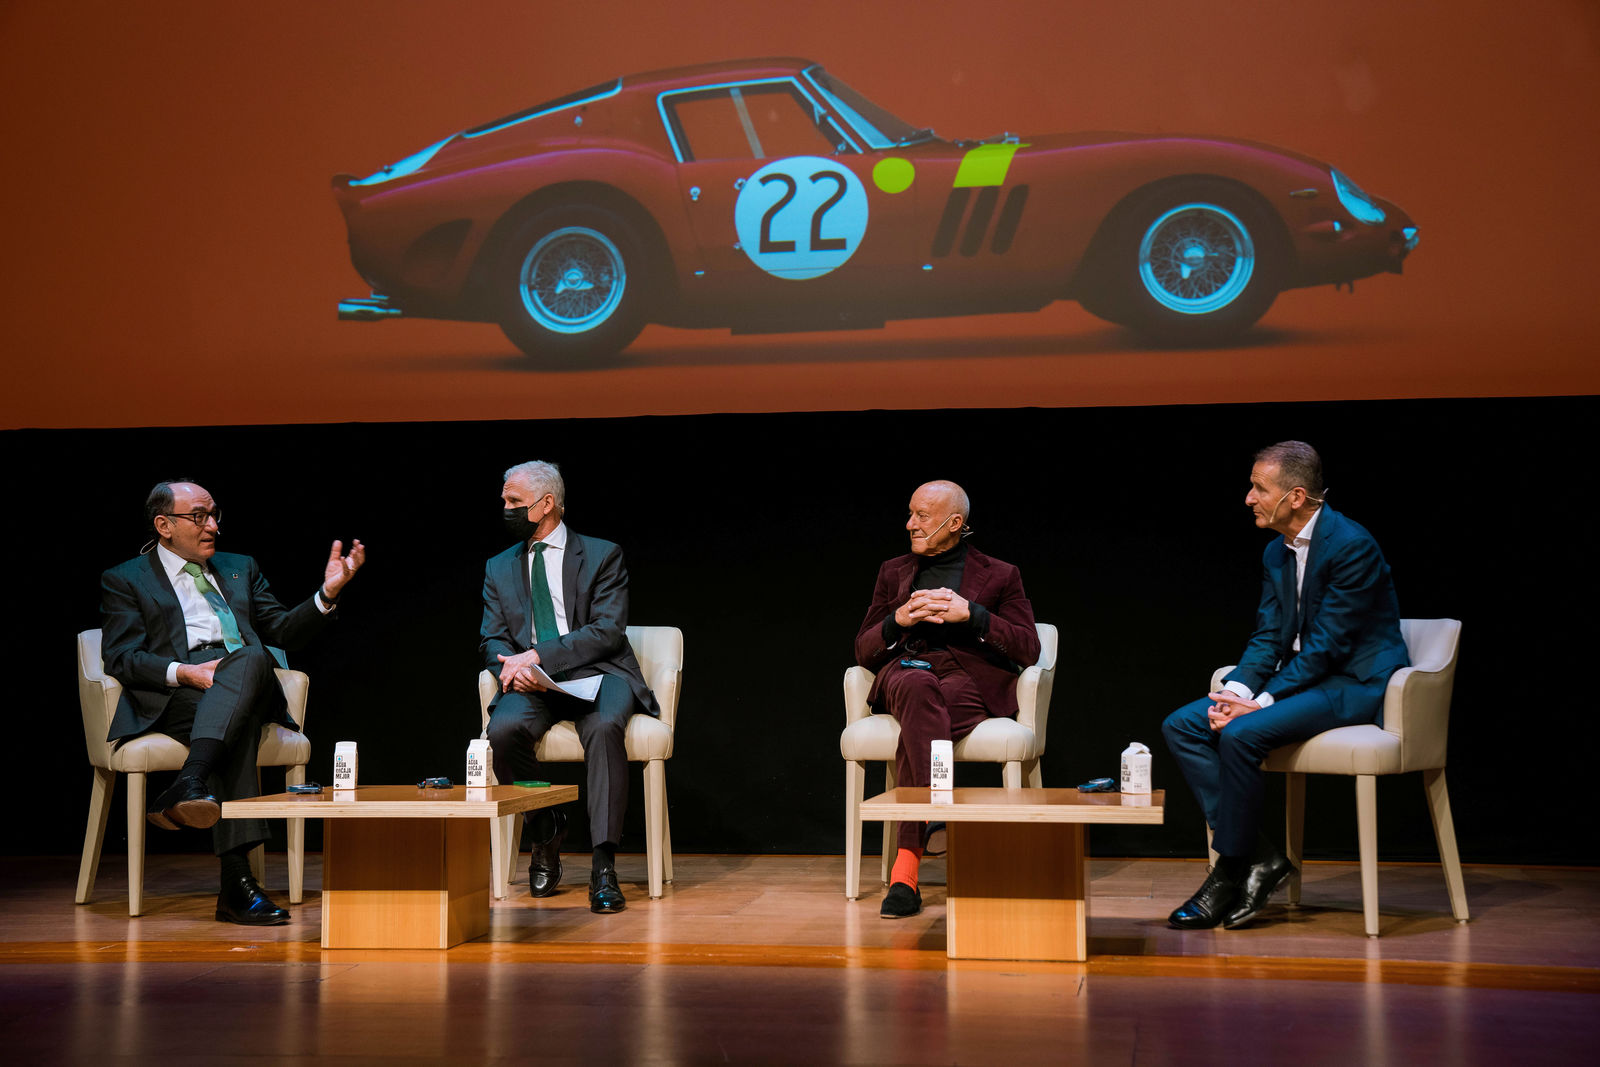 Exhibition opening of „Motion. Autos, Art, Architecture“ in the Guggenheim-Museum Bilbao on the 6th of April 2022